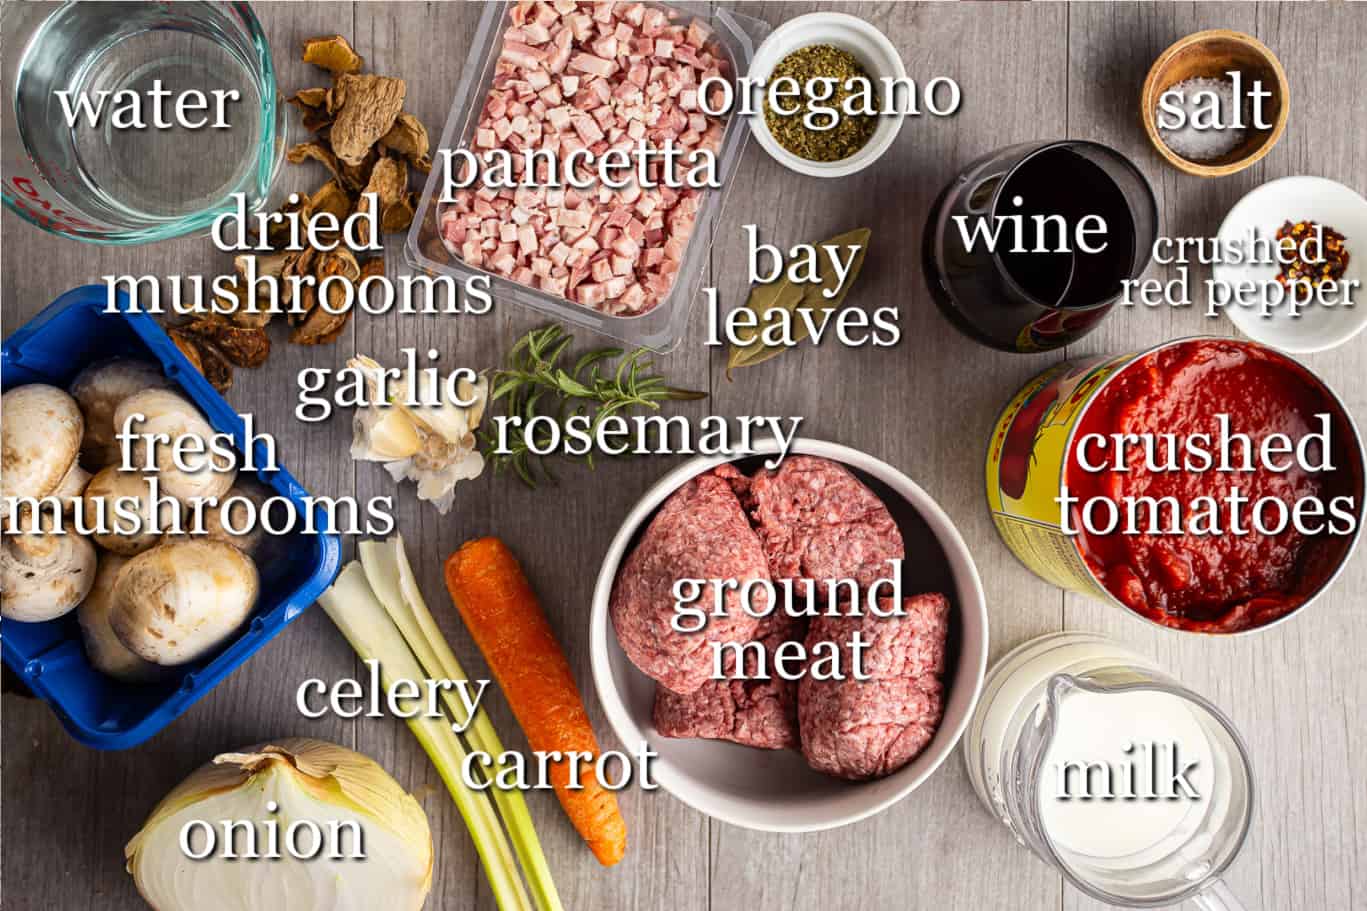 Ingredients for making Bolognese sauce, with text labels.